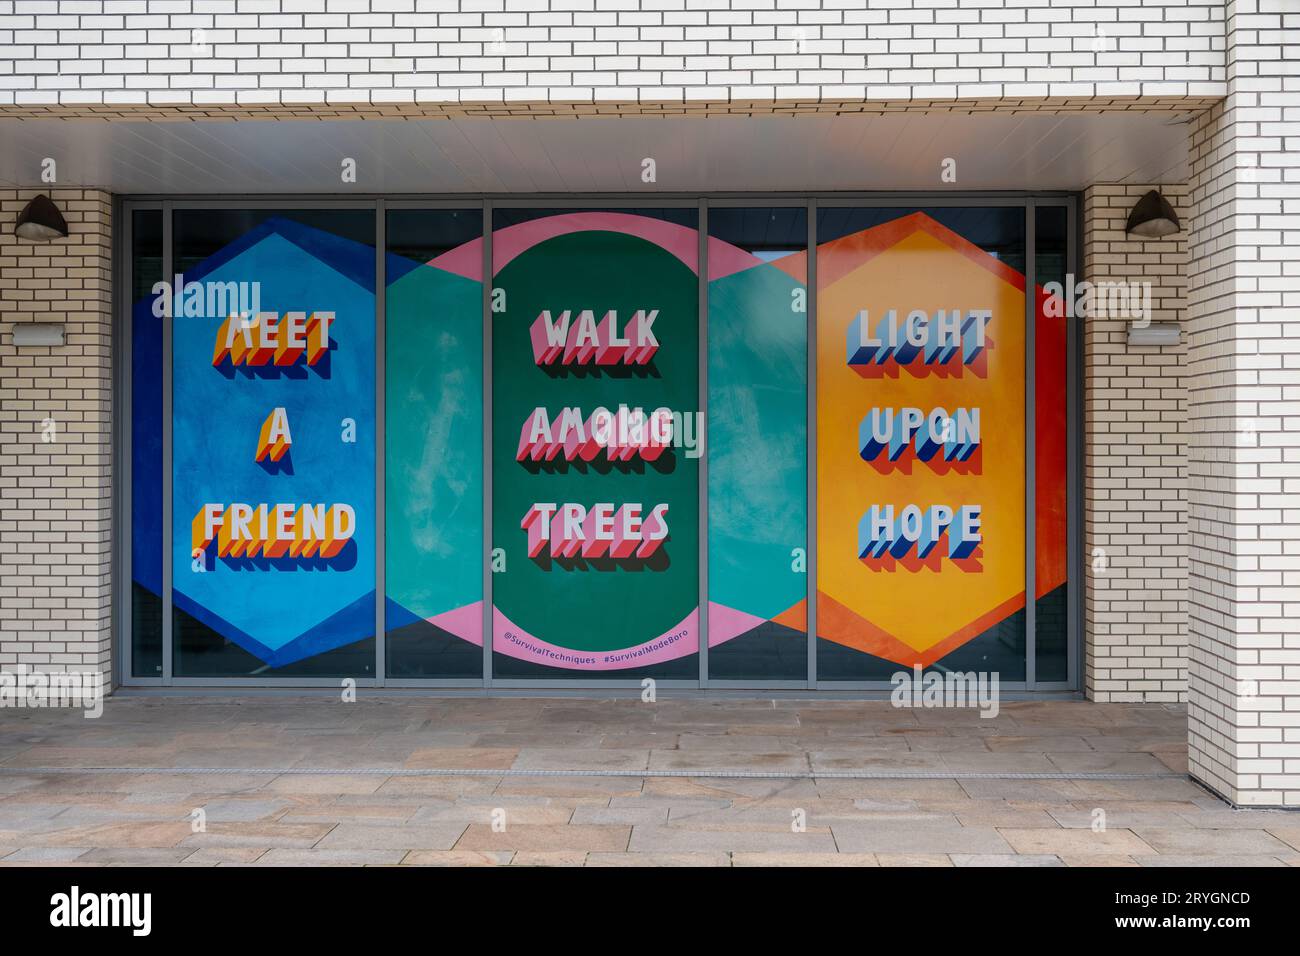 Public art in a window by a walkway in Central Square in the town - Survival Mode: Middlesbrough by Stellar Projects in Middlesbrough, UK Stock Photo